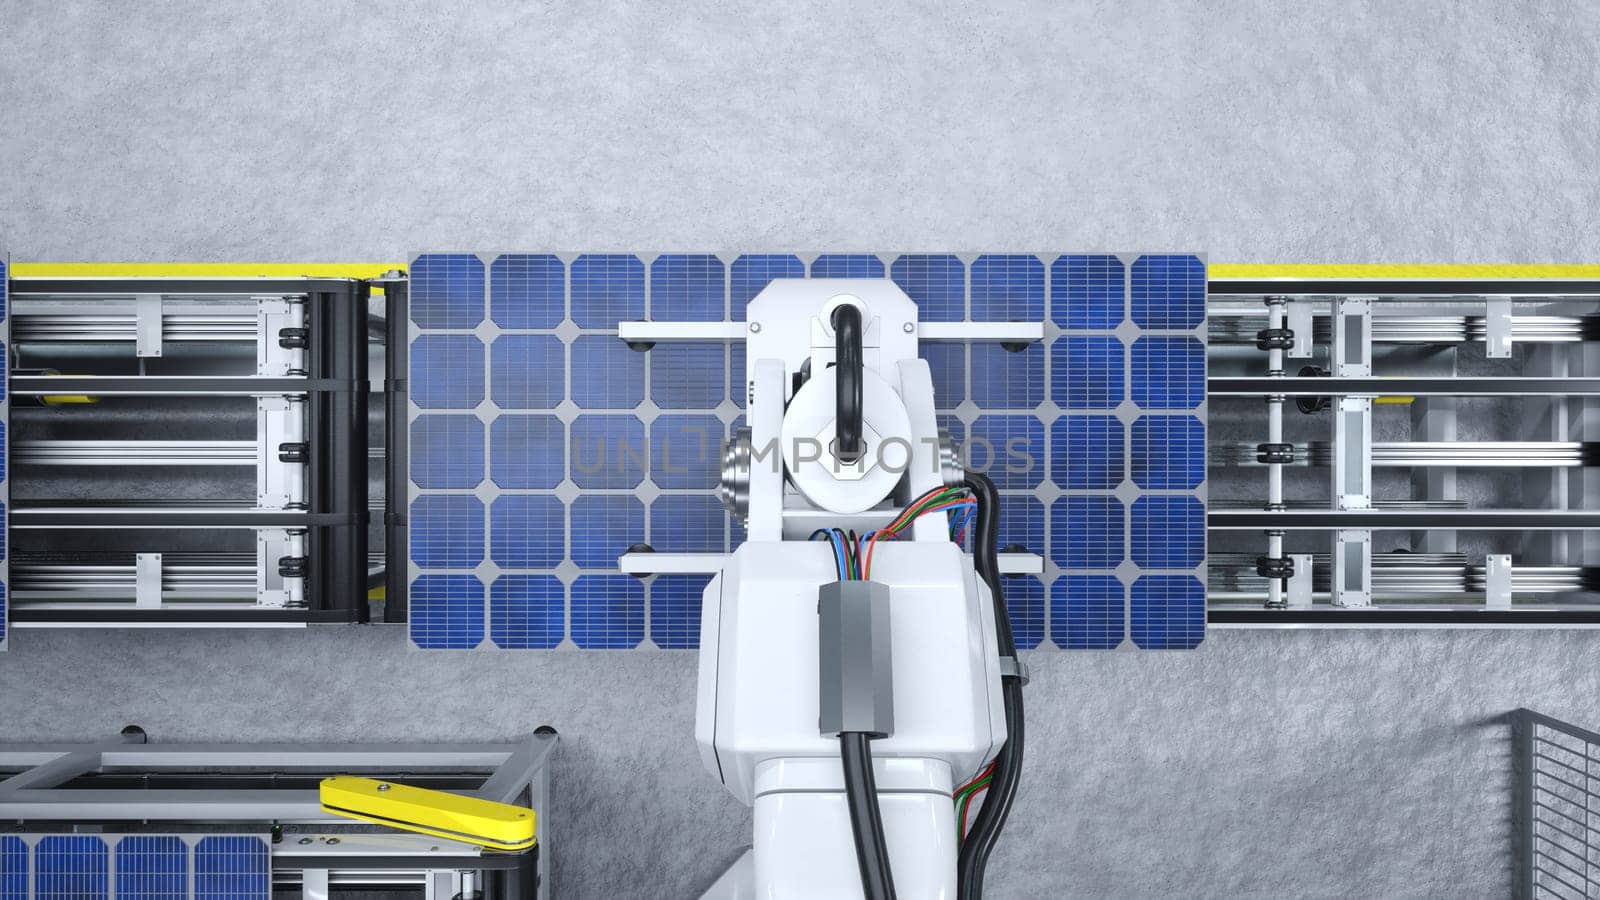 POV of robotic arms moving solar panels on conveyor belts during high tech production process in clean energy factory, 3D illustration. Heavy machinery unit placing PV cells on assembly lines